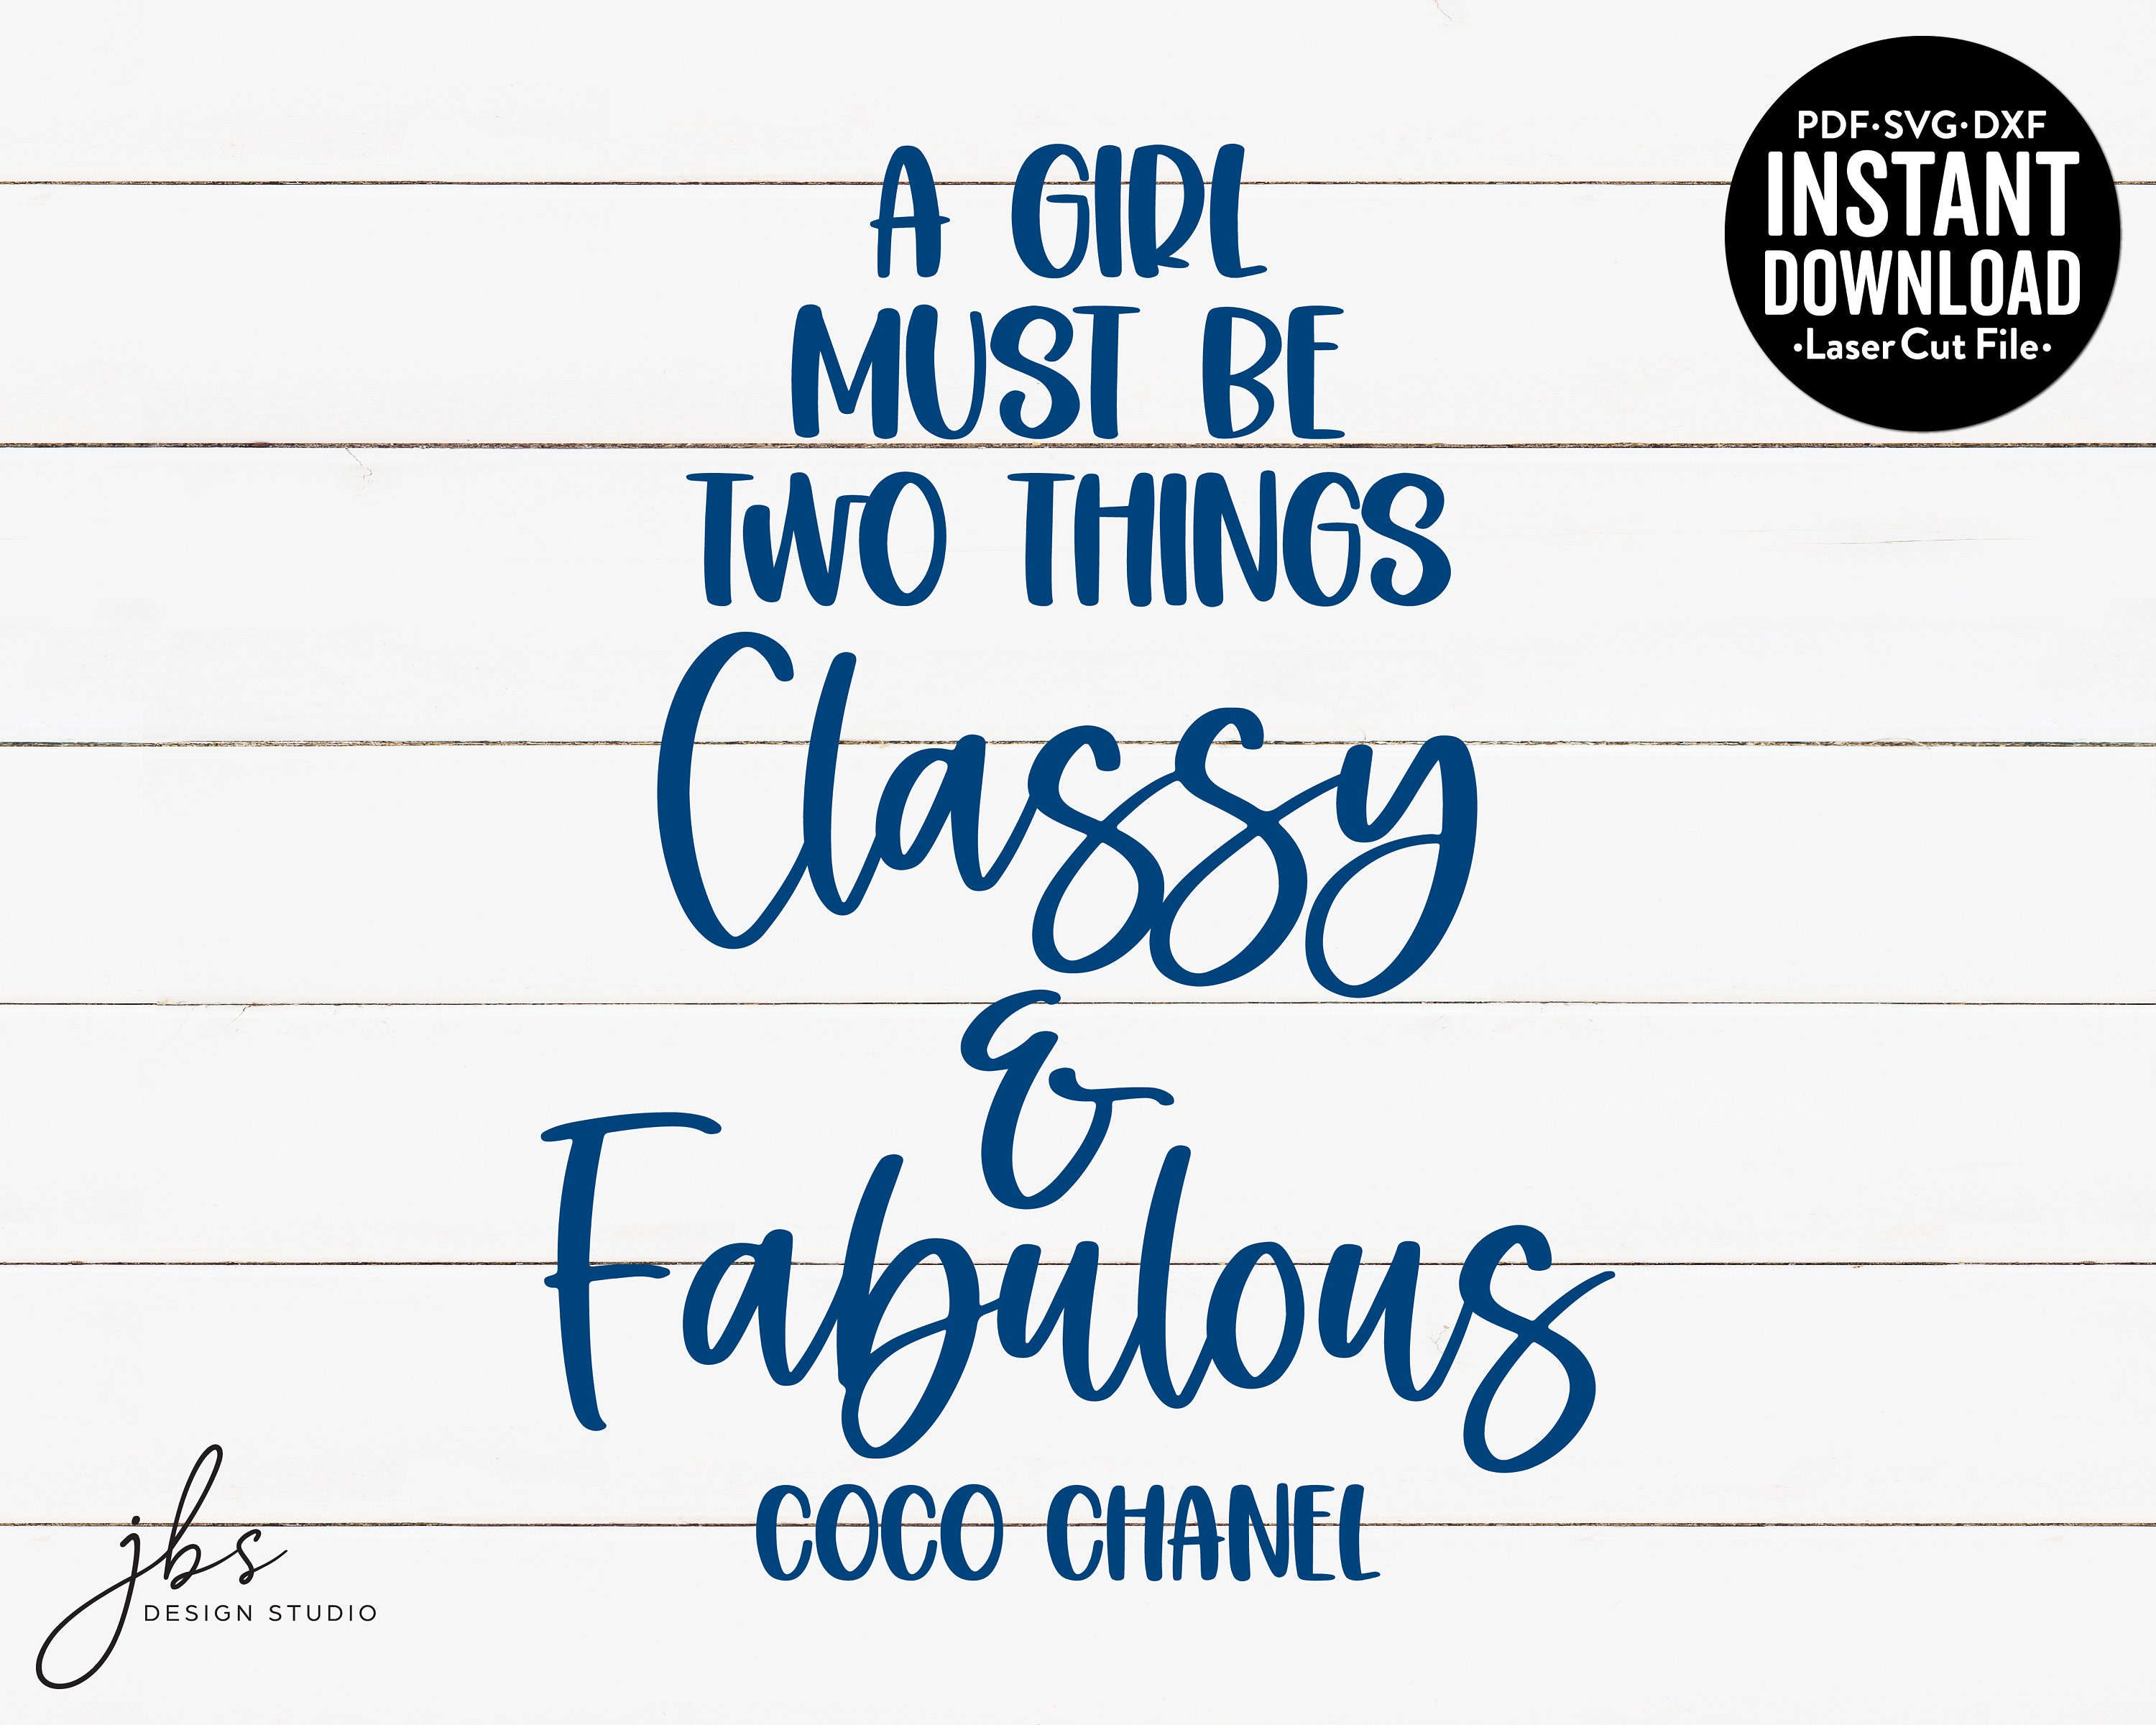 Nail Queen Studio - “A Girl Should Be Two Things: Classy